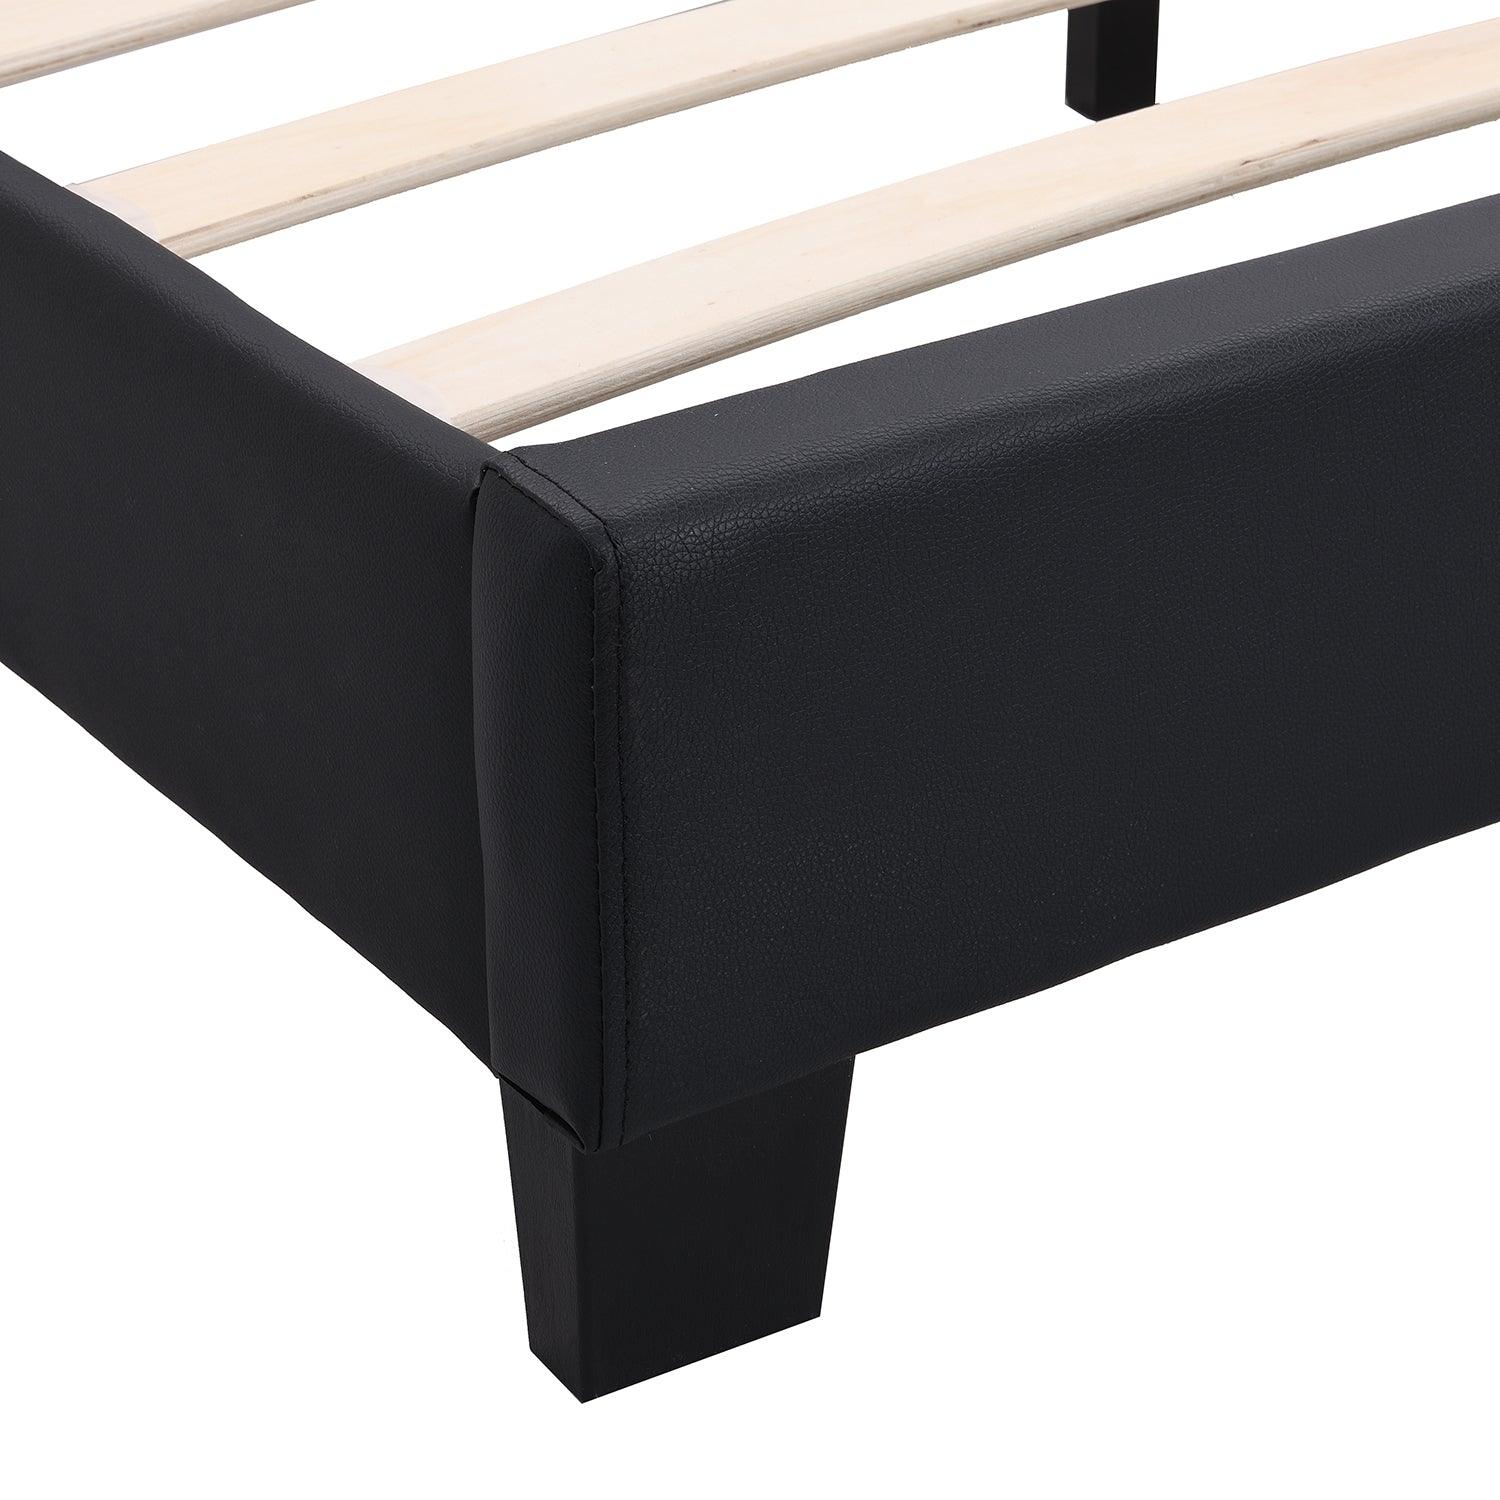 URSA Black PU Leather Bed Frame with LED on Footend